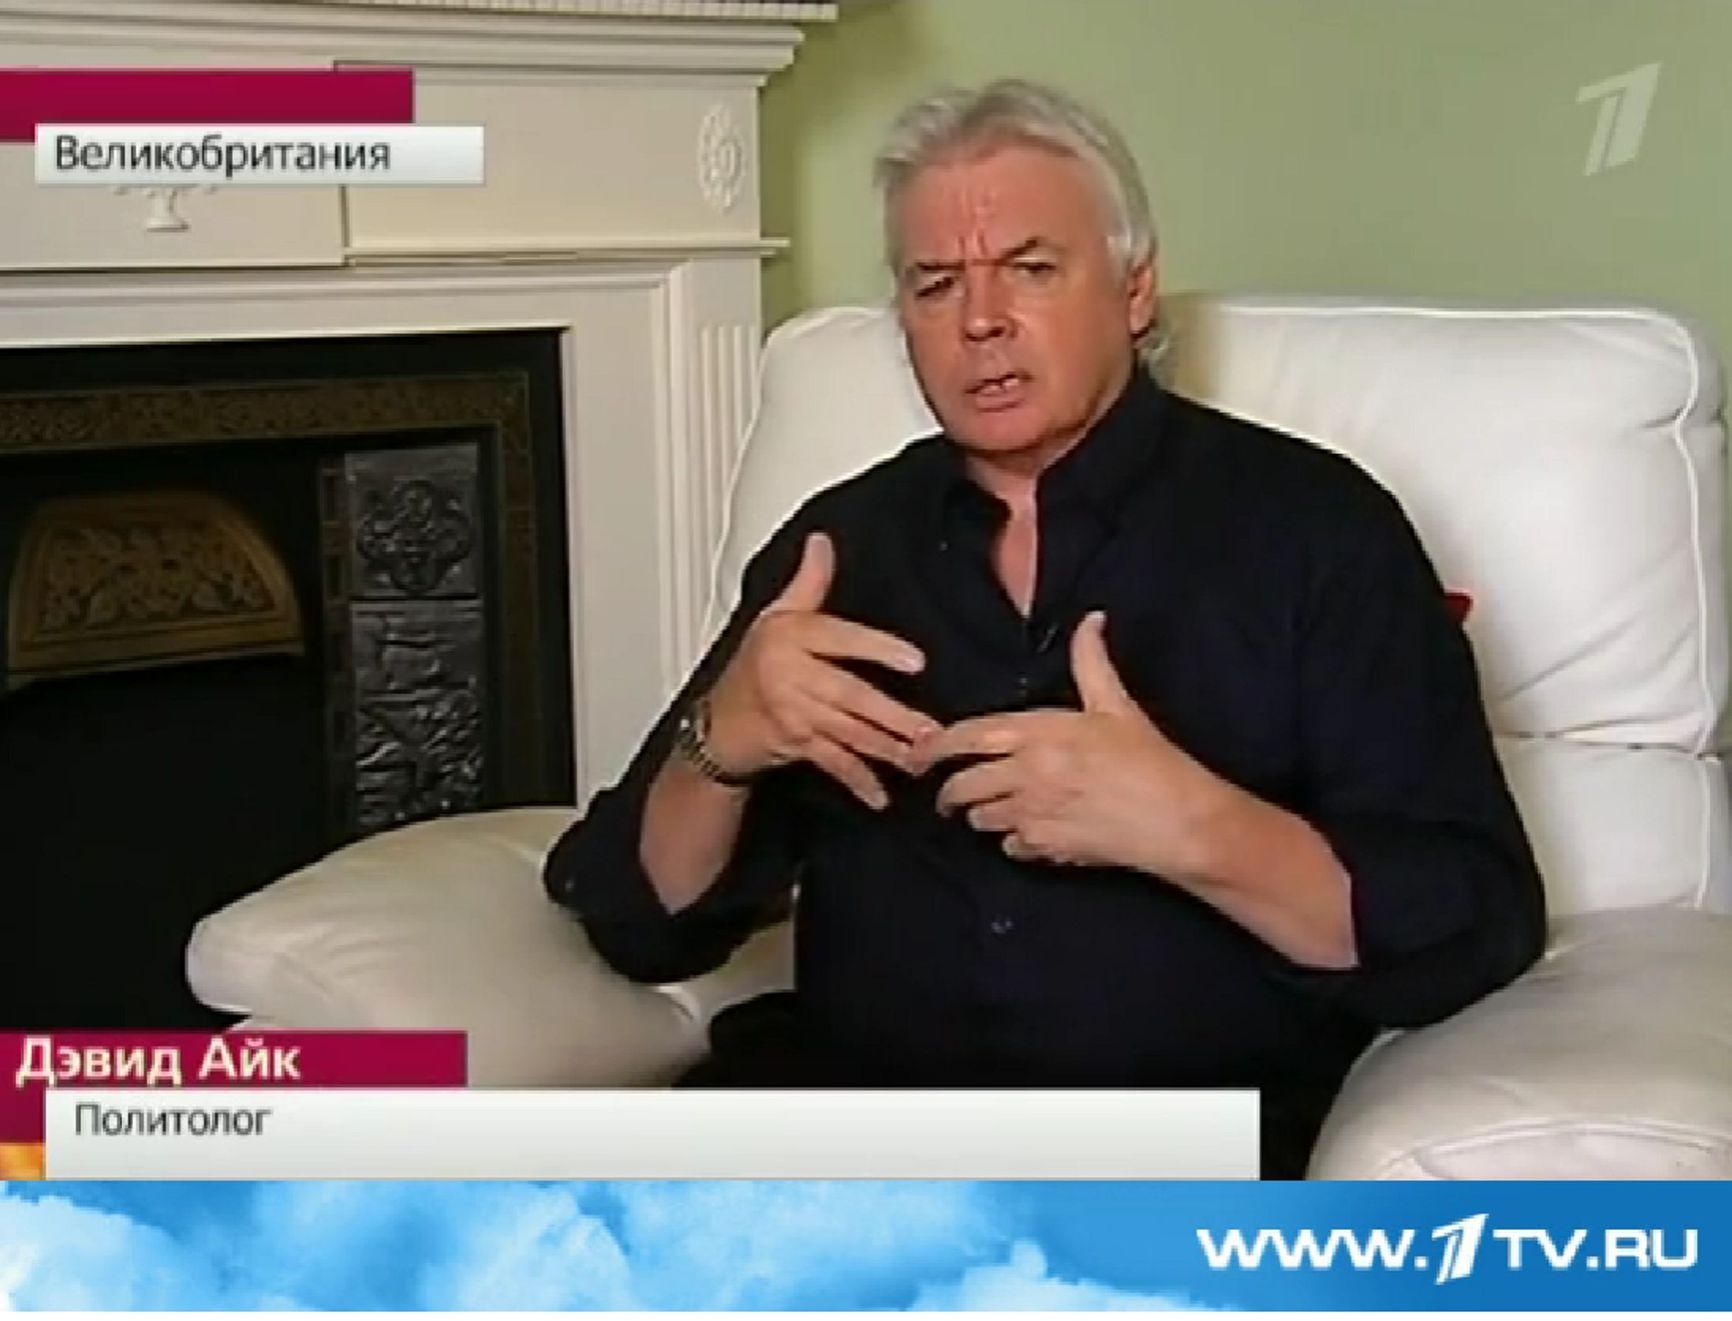 David Icke, footballer, political analyst, author of the reptilian theory